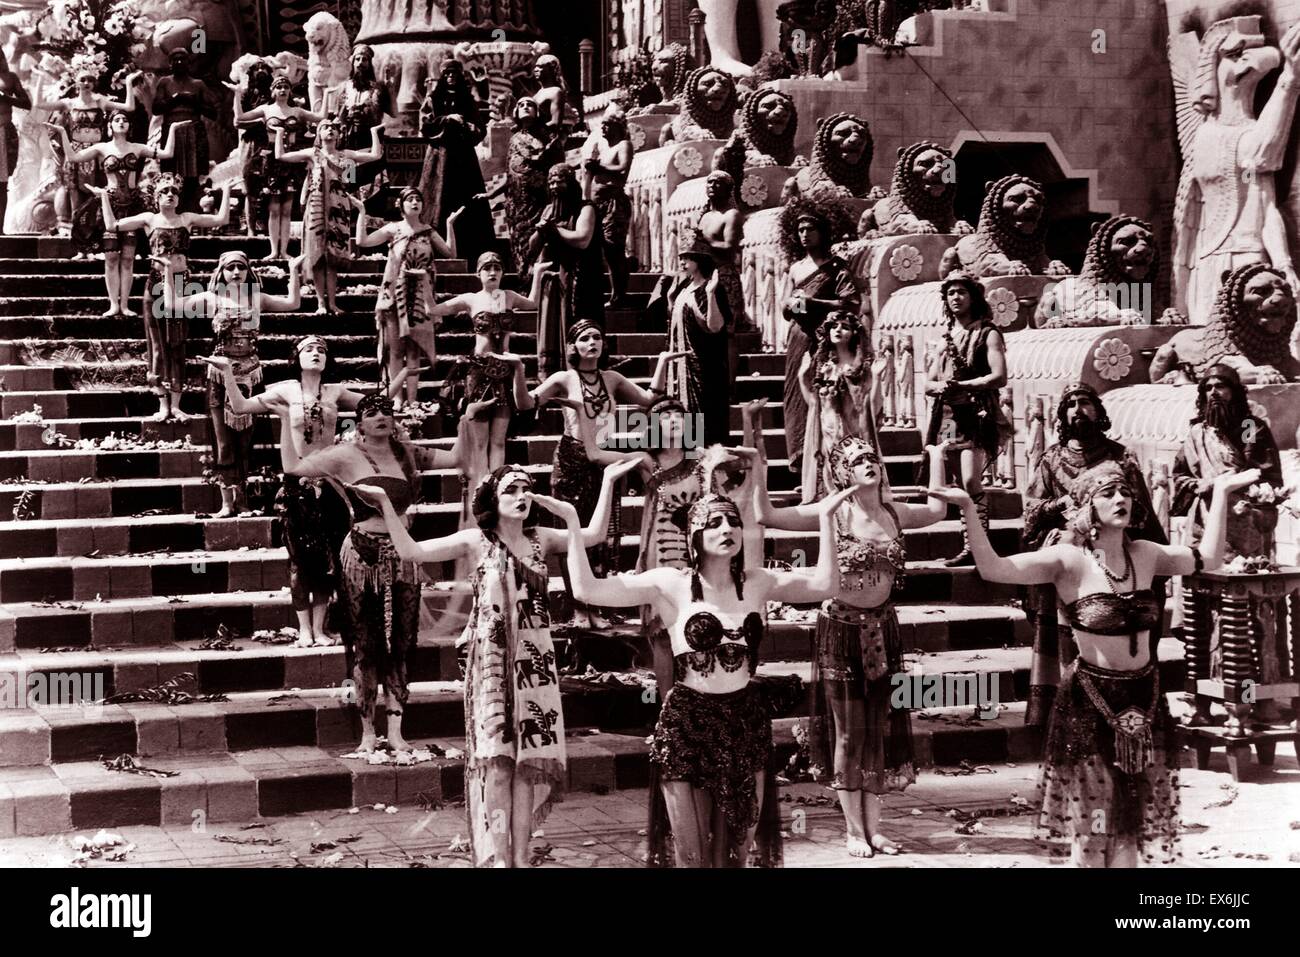 Intolerance (film), a 1916 film by D.W. Griffith. Scene from a Babylonian story: the fall of the Babylonian Empire to Persia in 539 BC Stock Photo